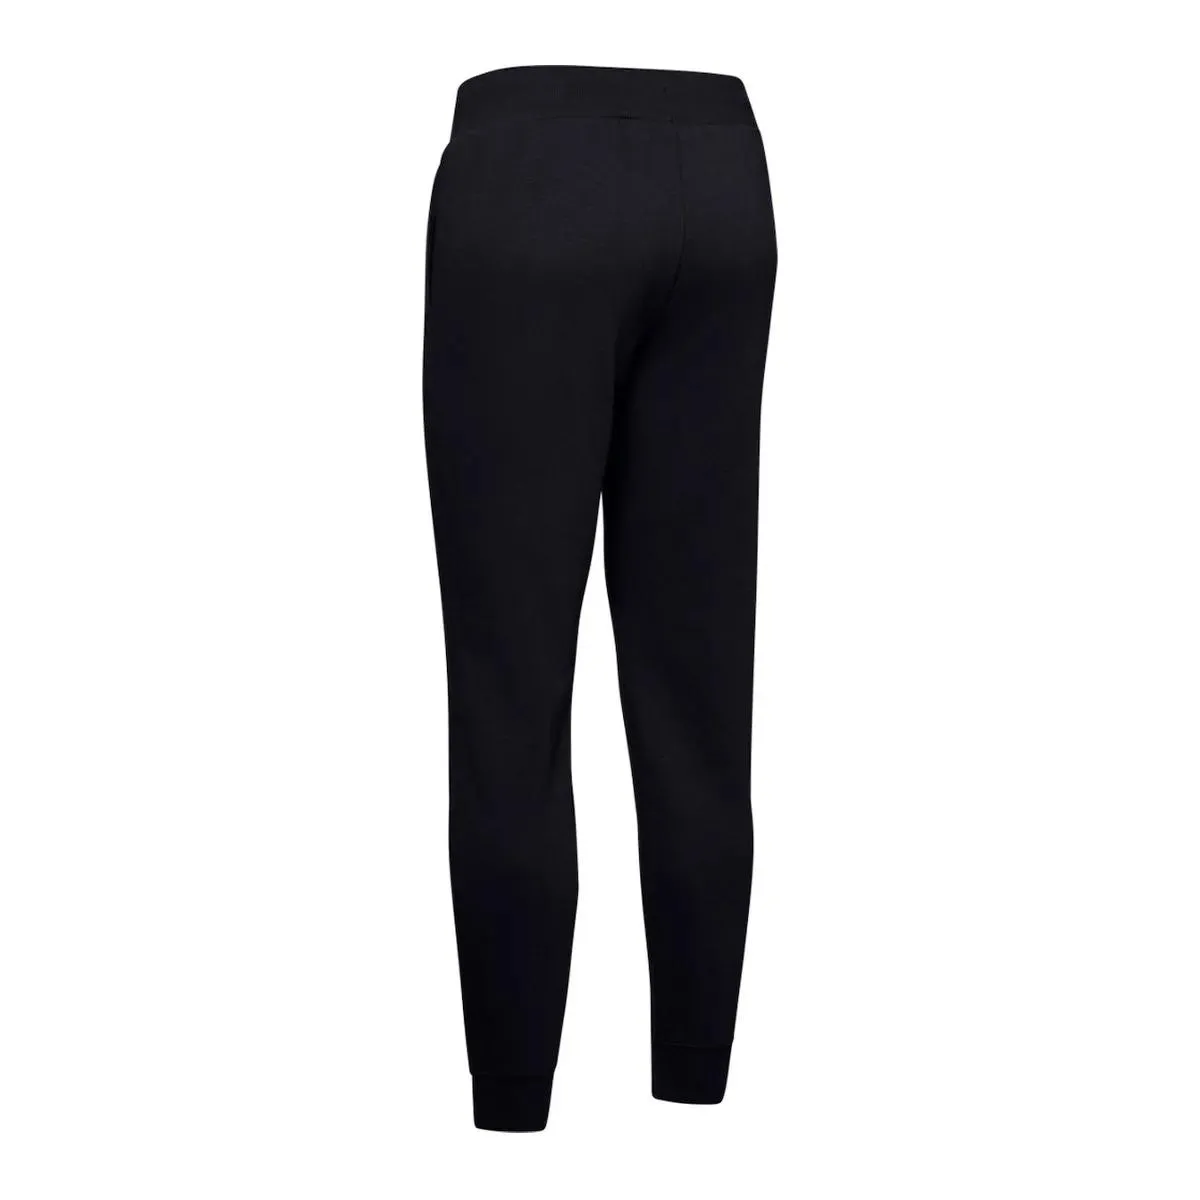 Under Armour Hlače RIVAL FLEECE SOLID PANT 